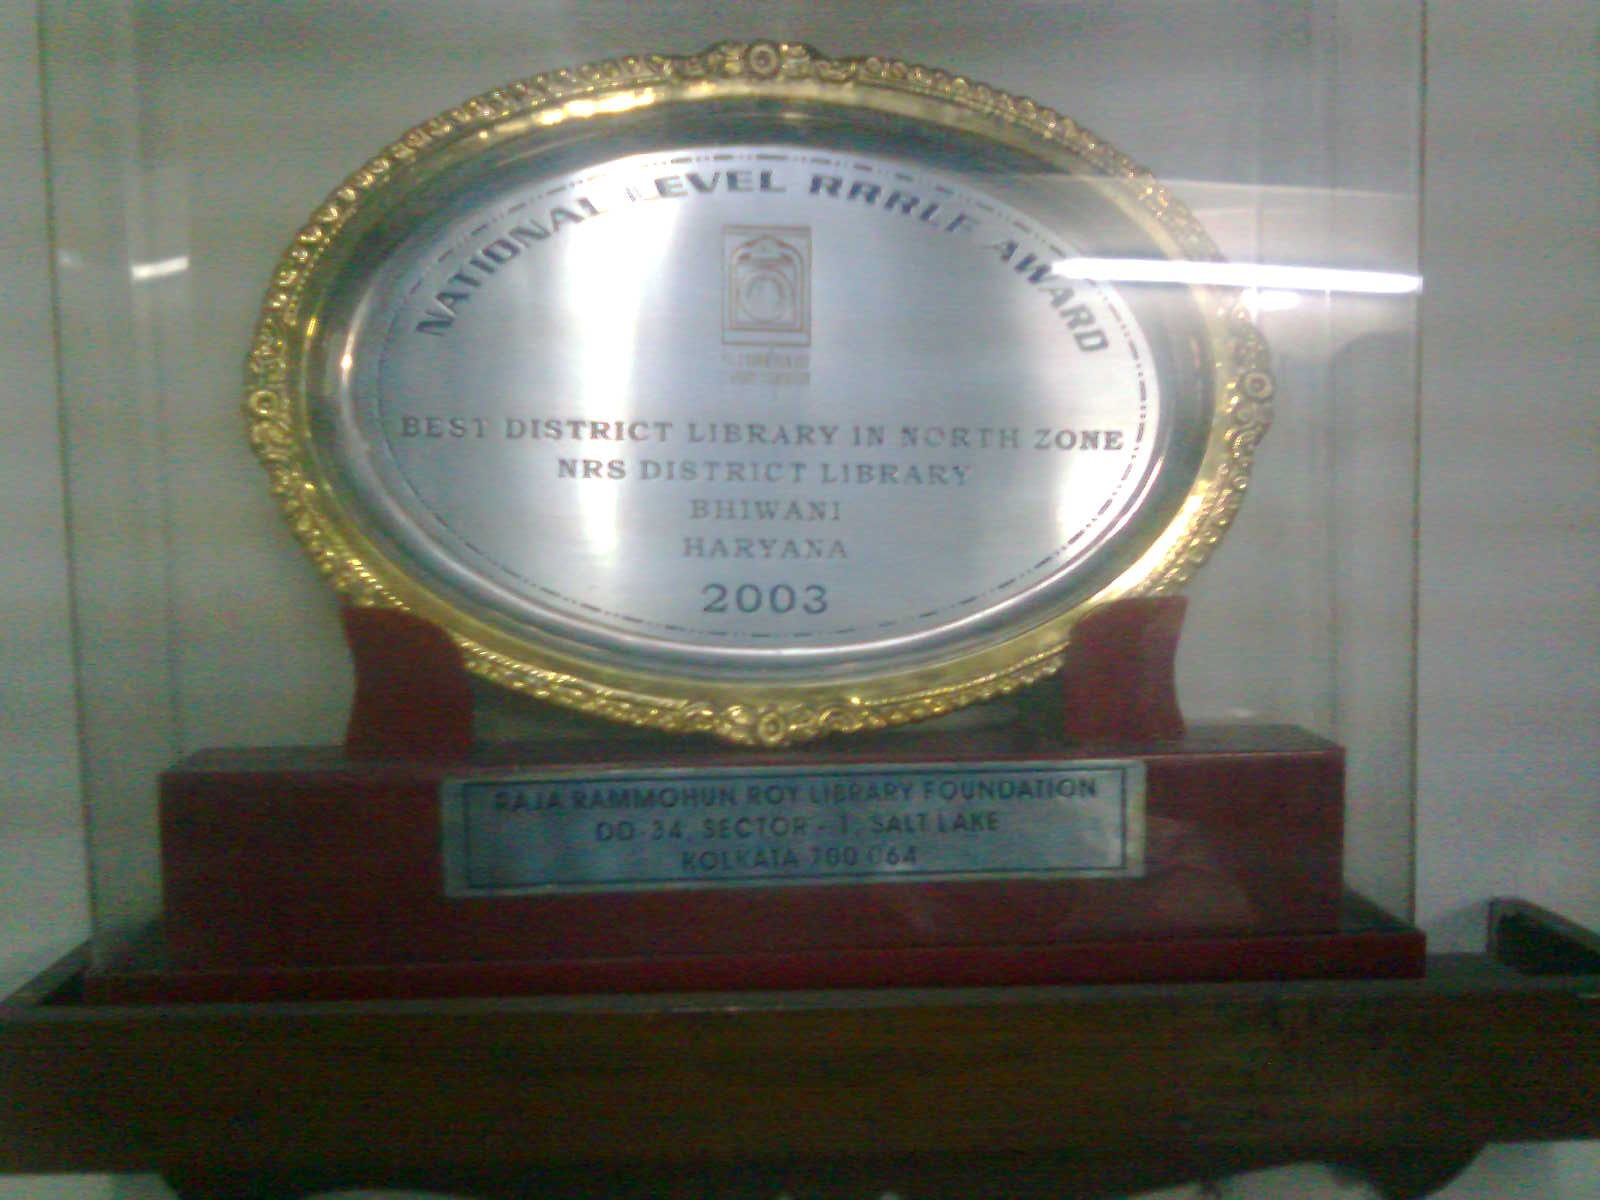 Best Library Trophy, 2003, District Library, Bhiwani